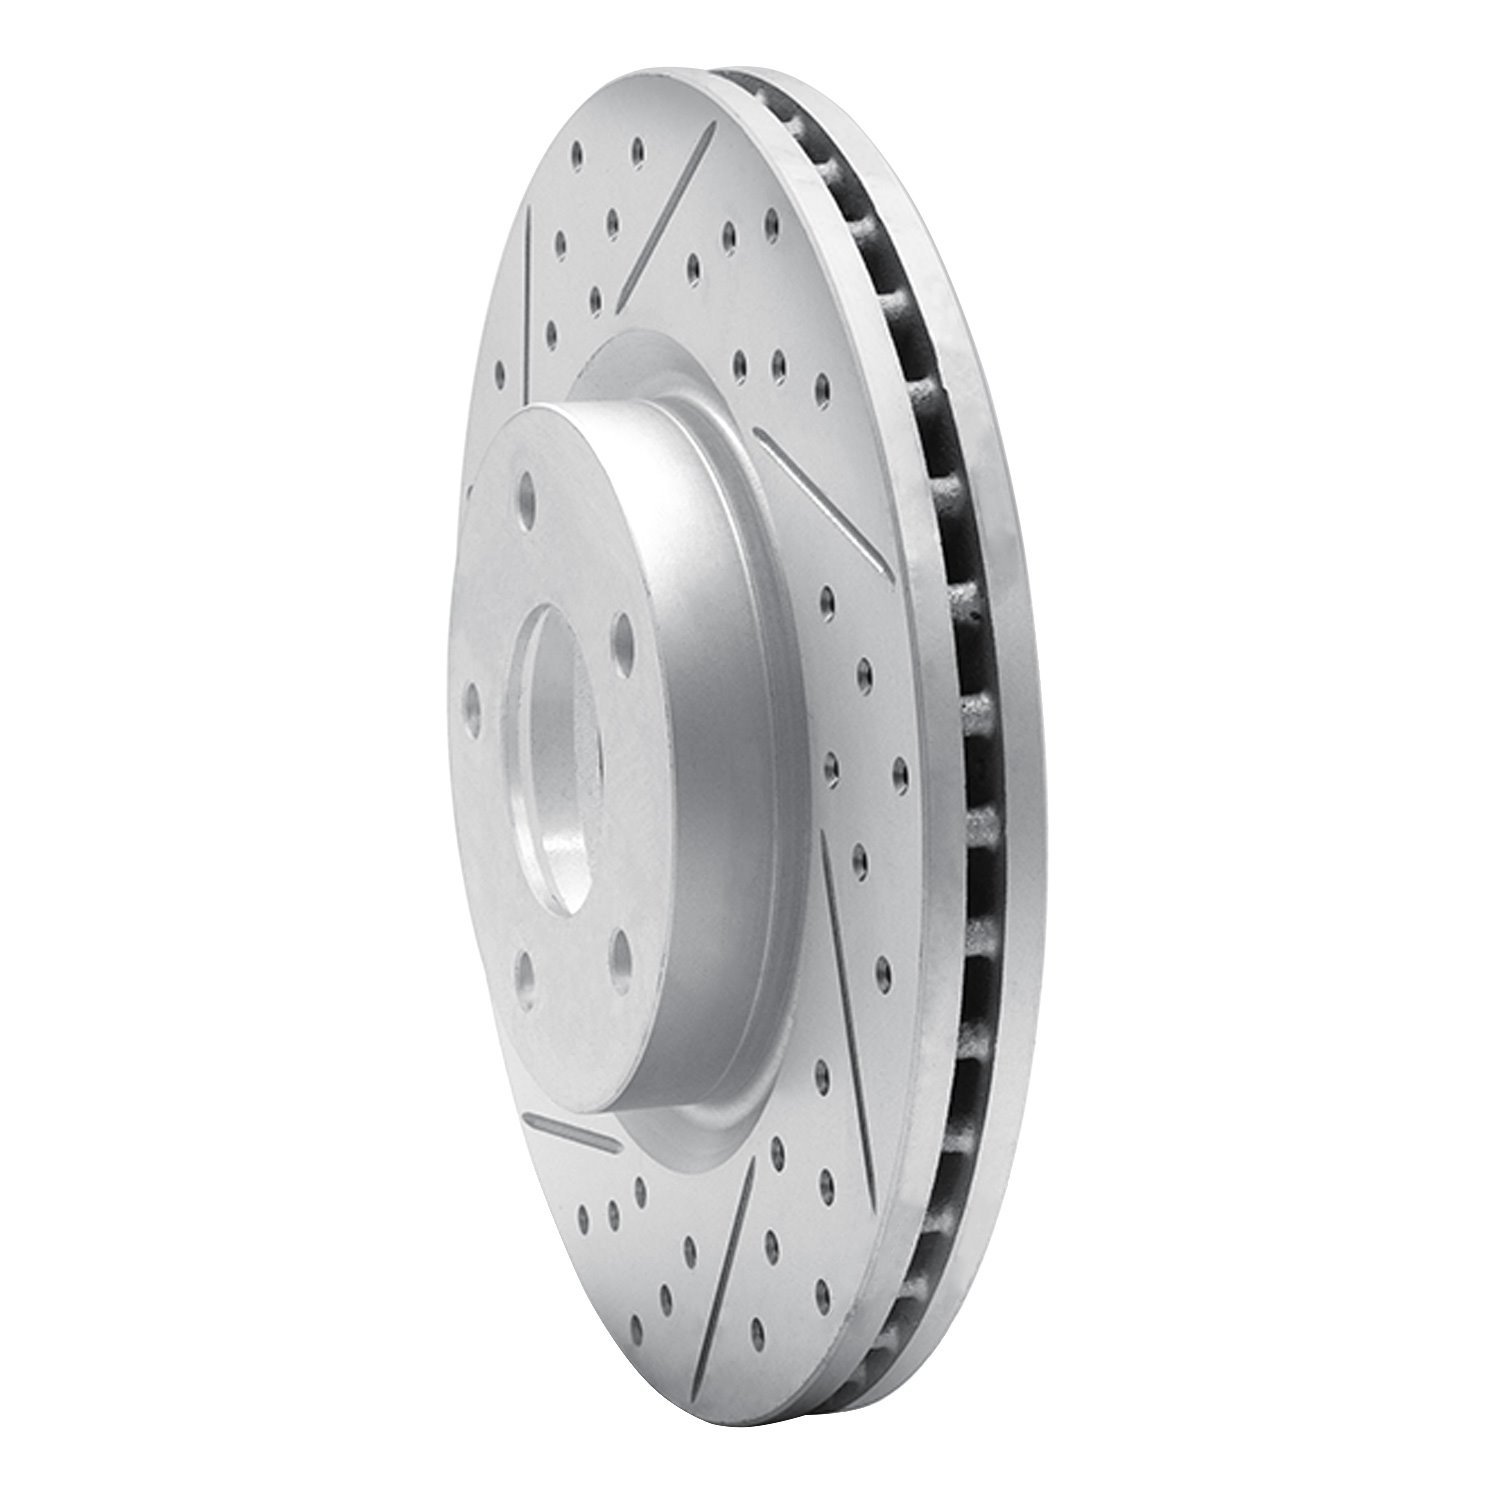 830-67066L Geoperformance Drilled/Slotted Brake Rotor, Fits Select Infiniti/Nissan, Position: Front Left